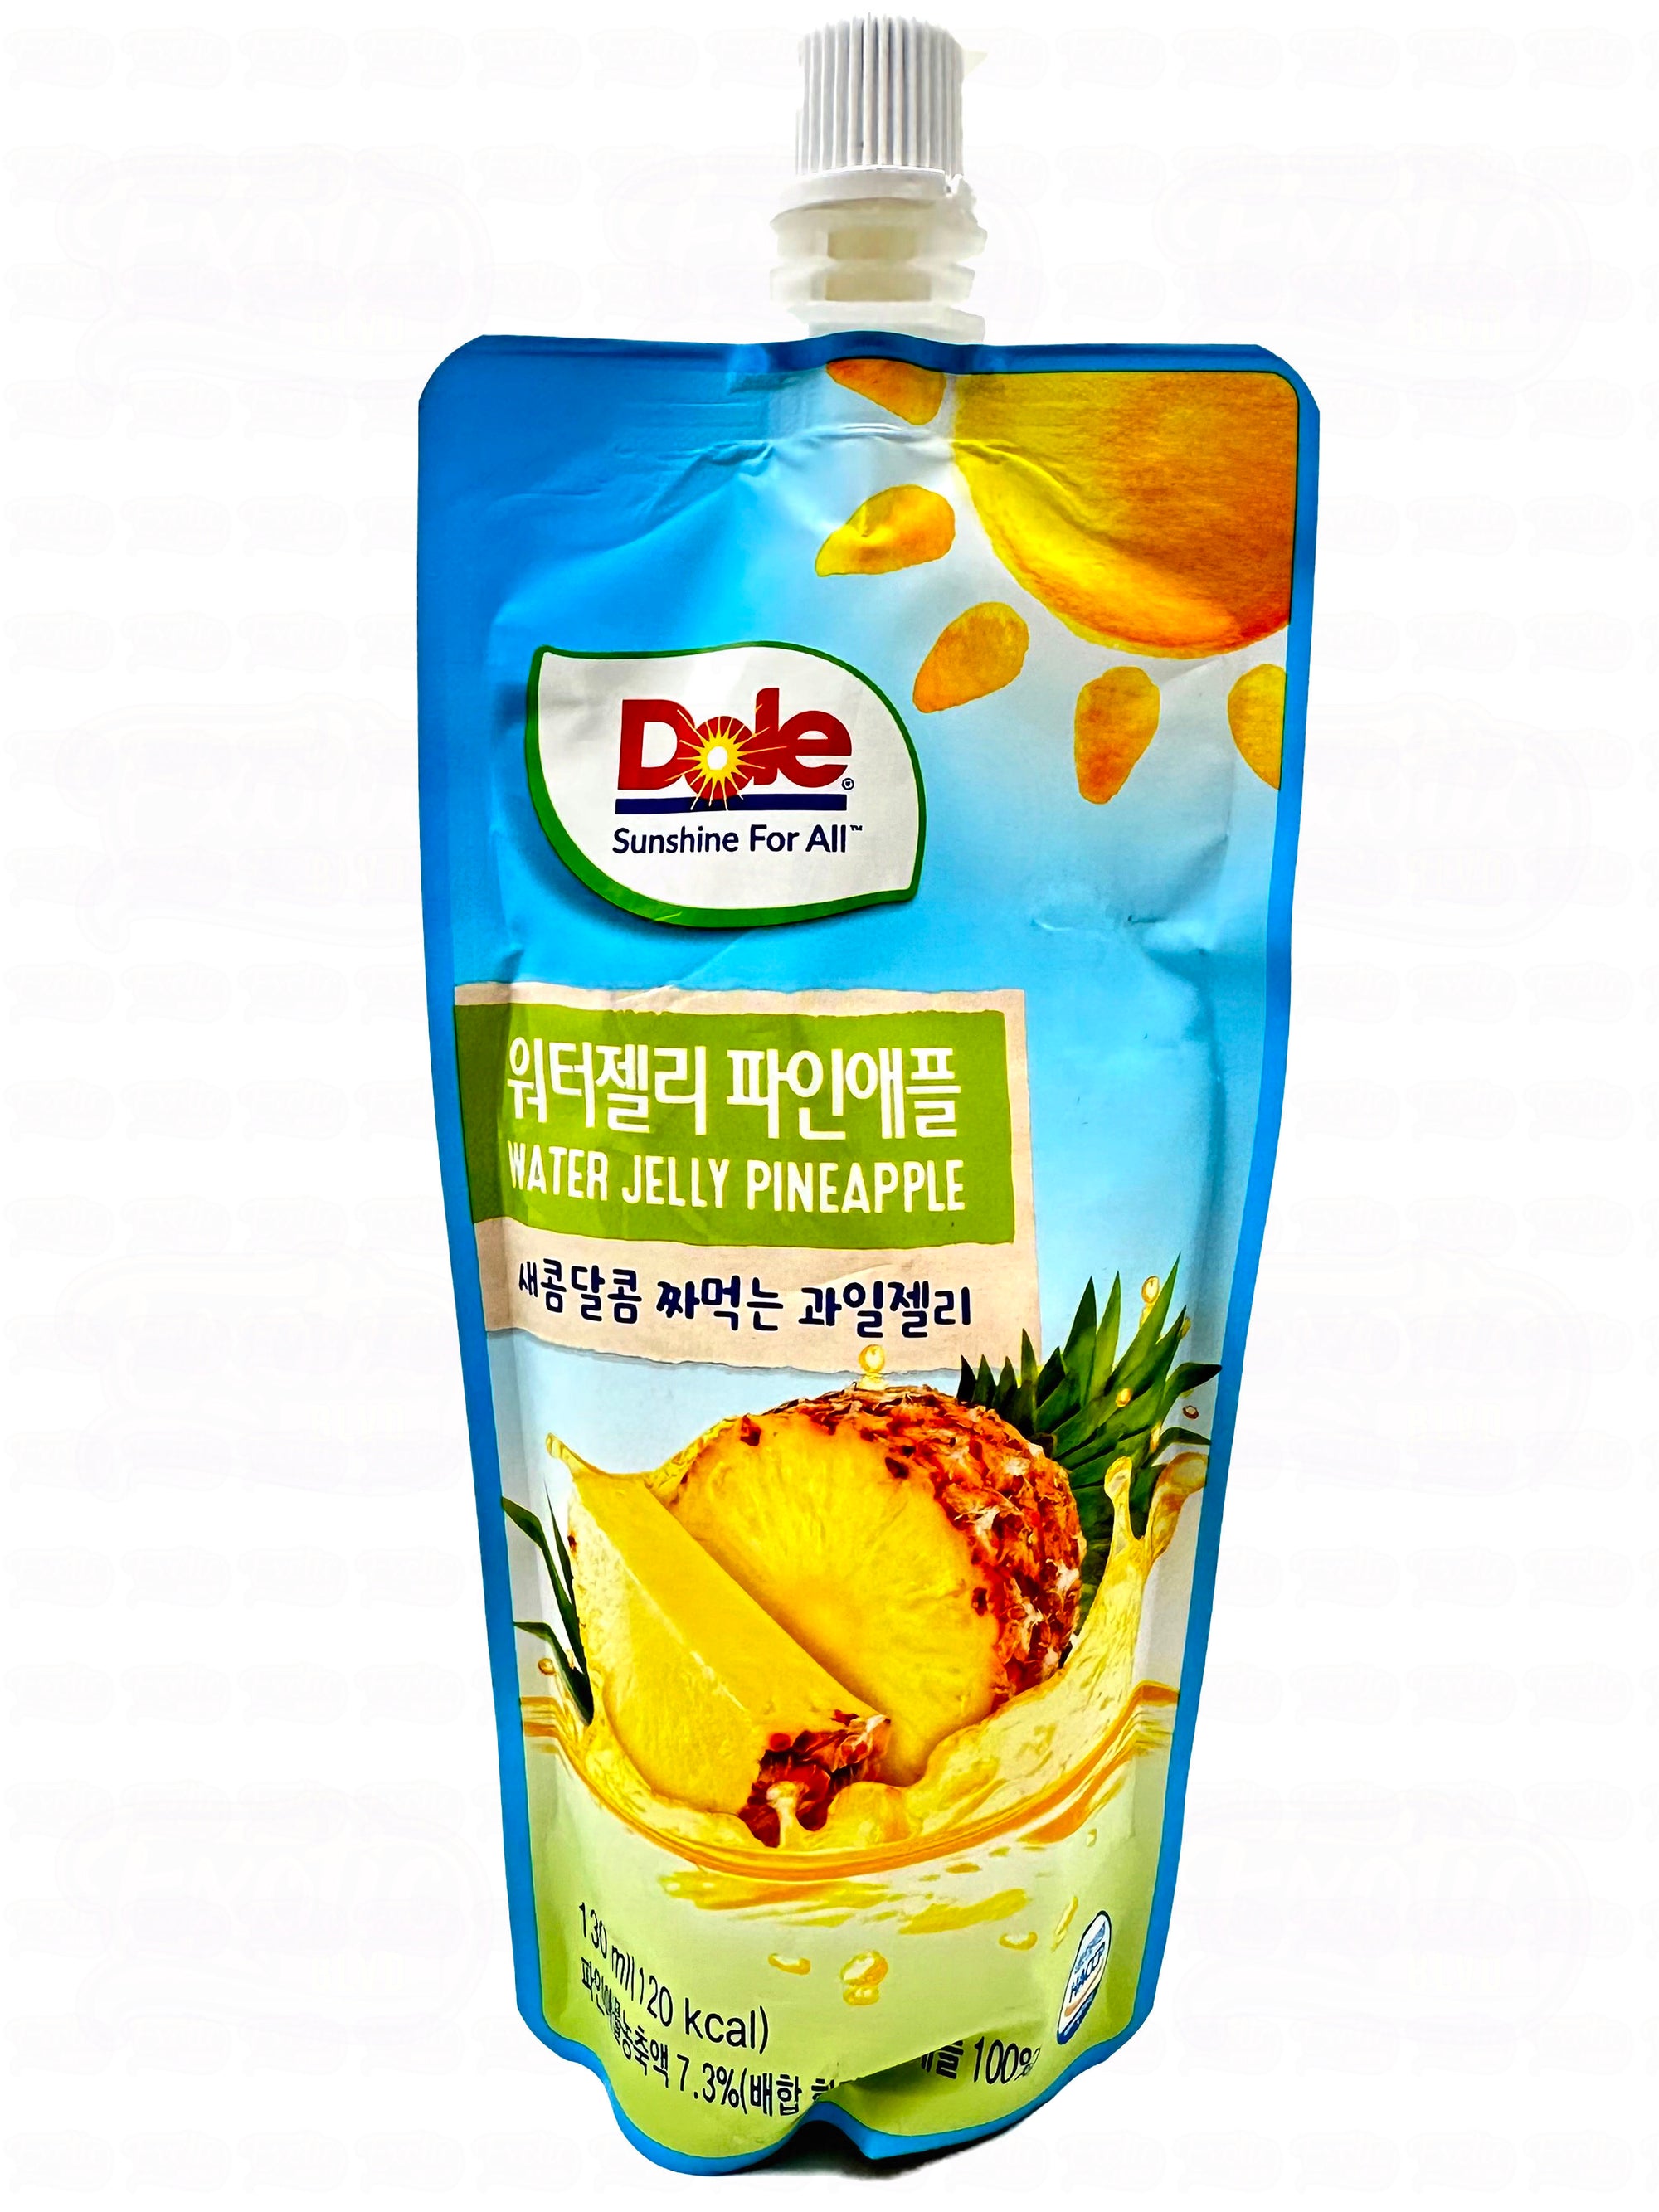 Dole Water Jelly Pineapple